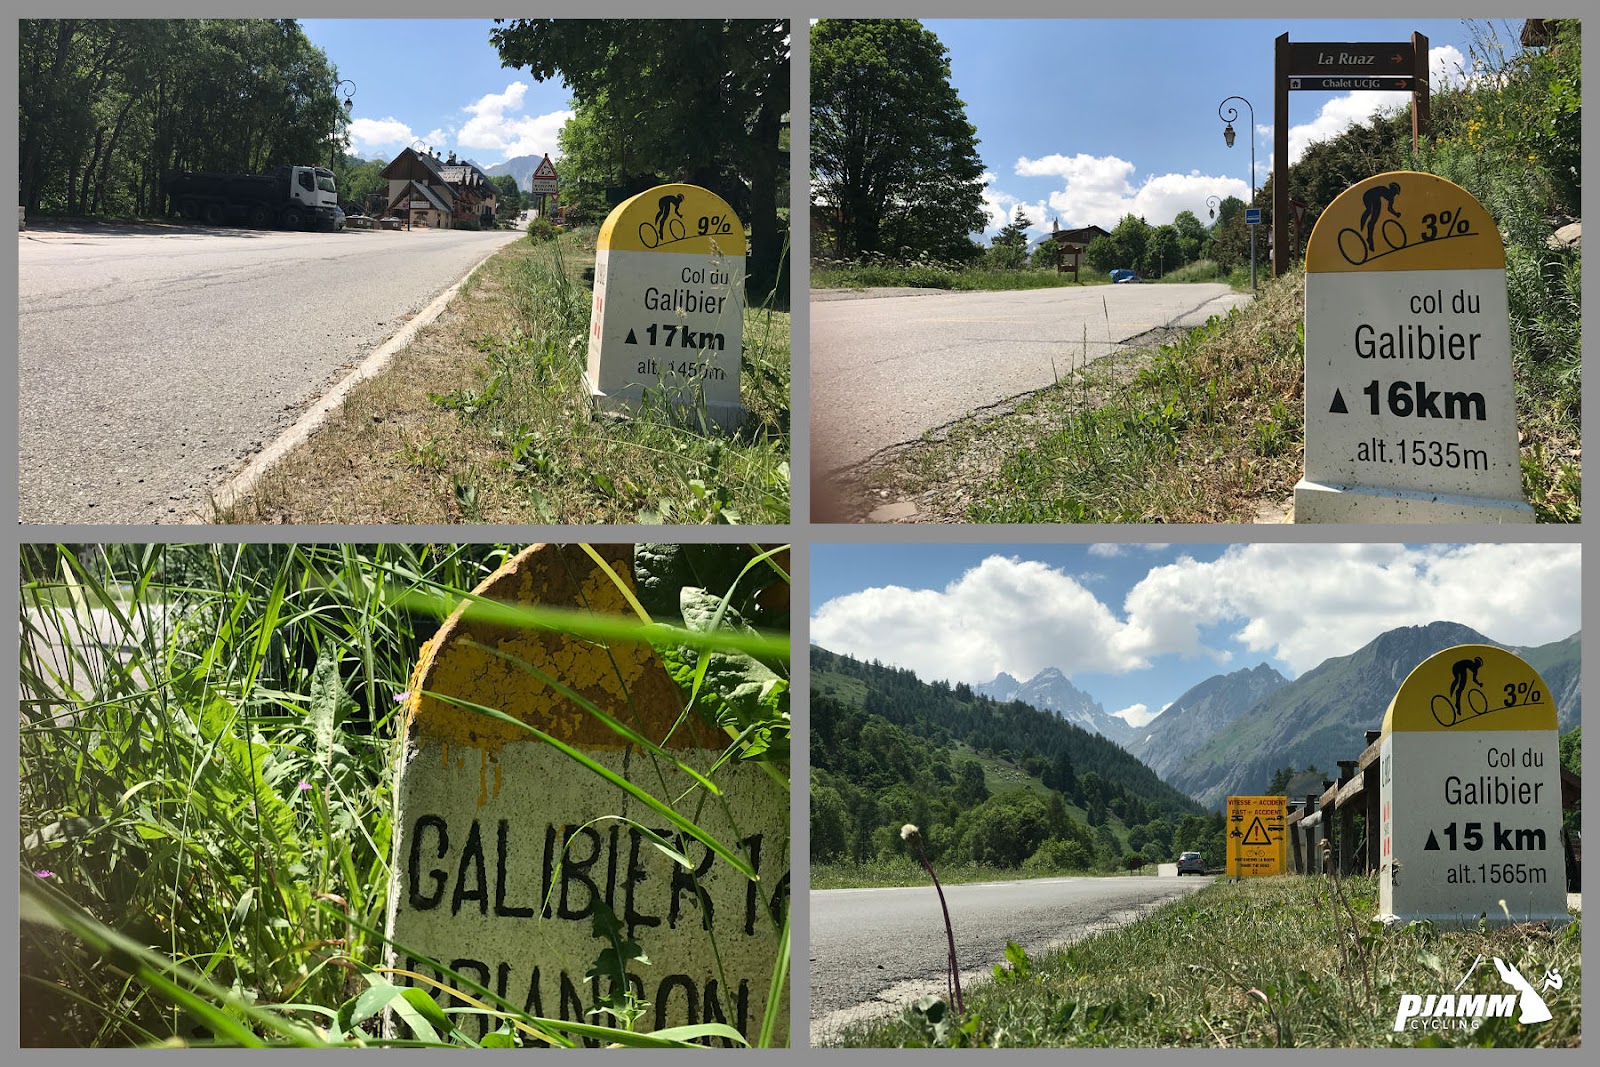 Cycling Col du Galibier from Valloire: photo collage shows various yellow and white KM markers throughout the climb